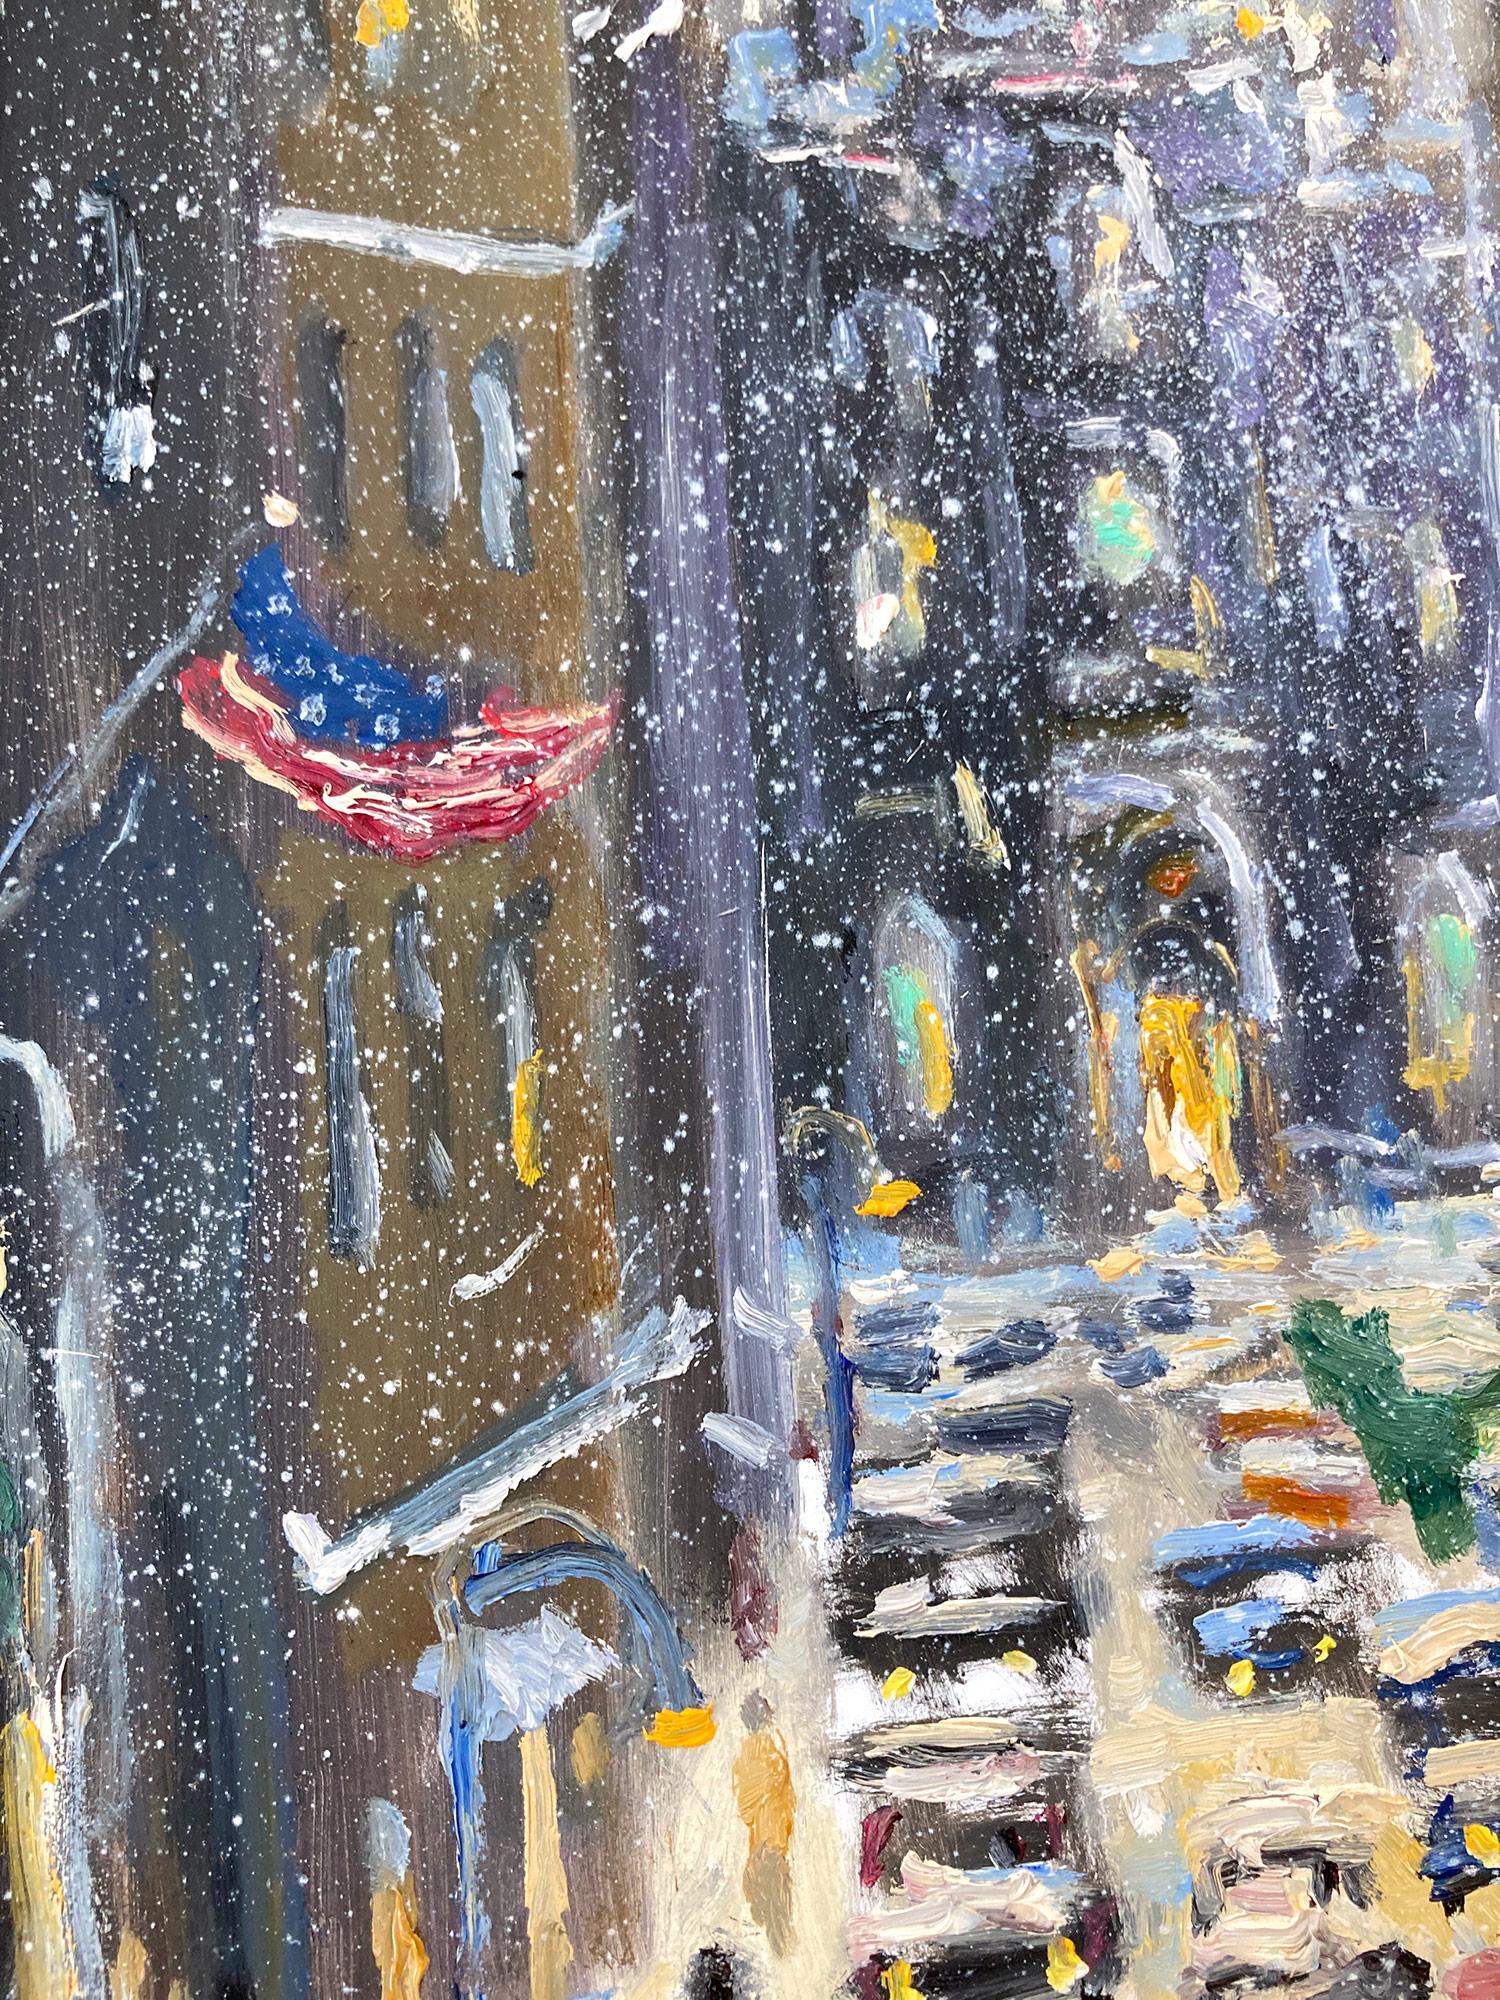 Impressionist New York City winter city-scene depicting Trinity Church with American flags, cars and pedestrians in a most intimate, yet energetic way. Christopher is known for capturing the beauty and simplicity of an earlier time of the 20th